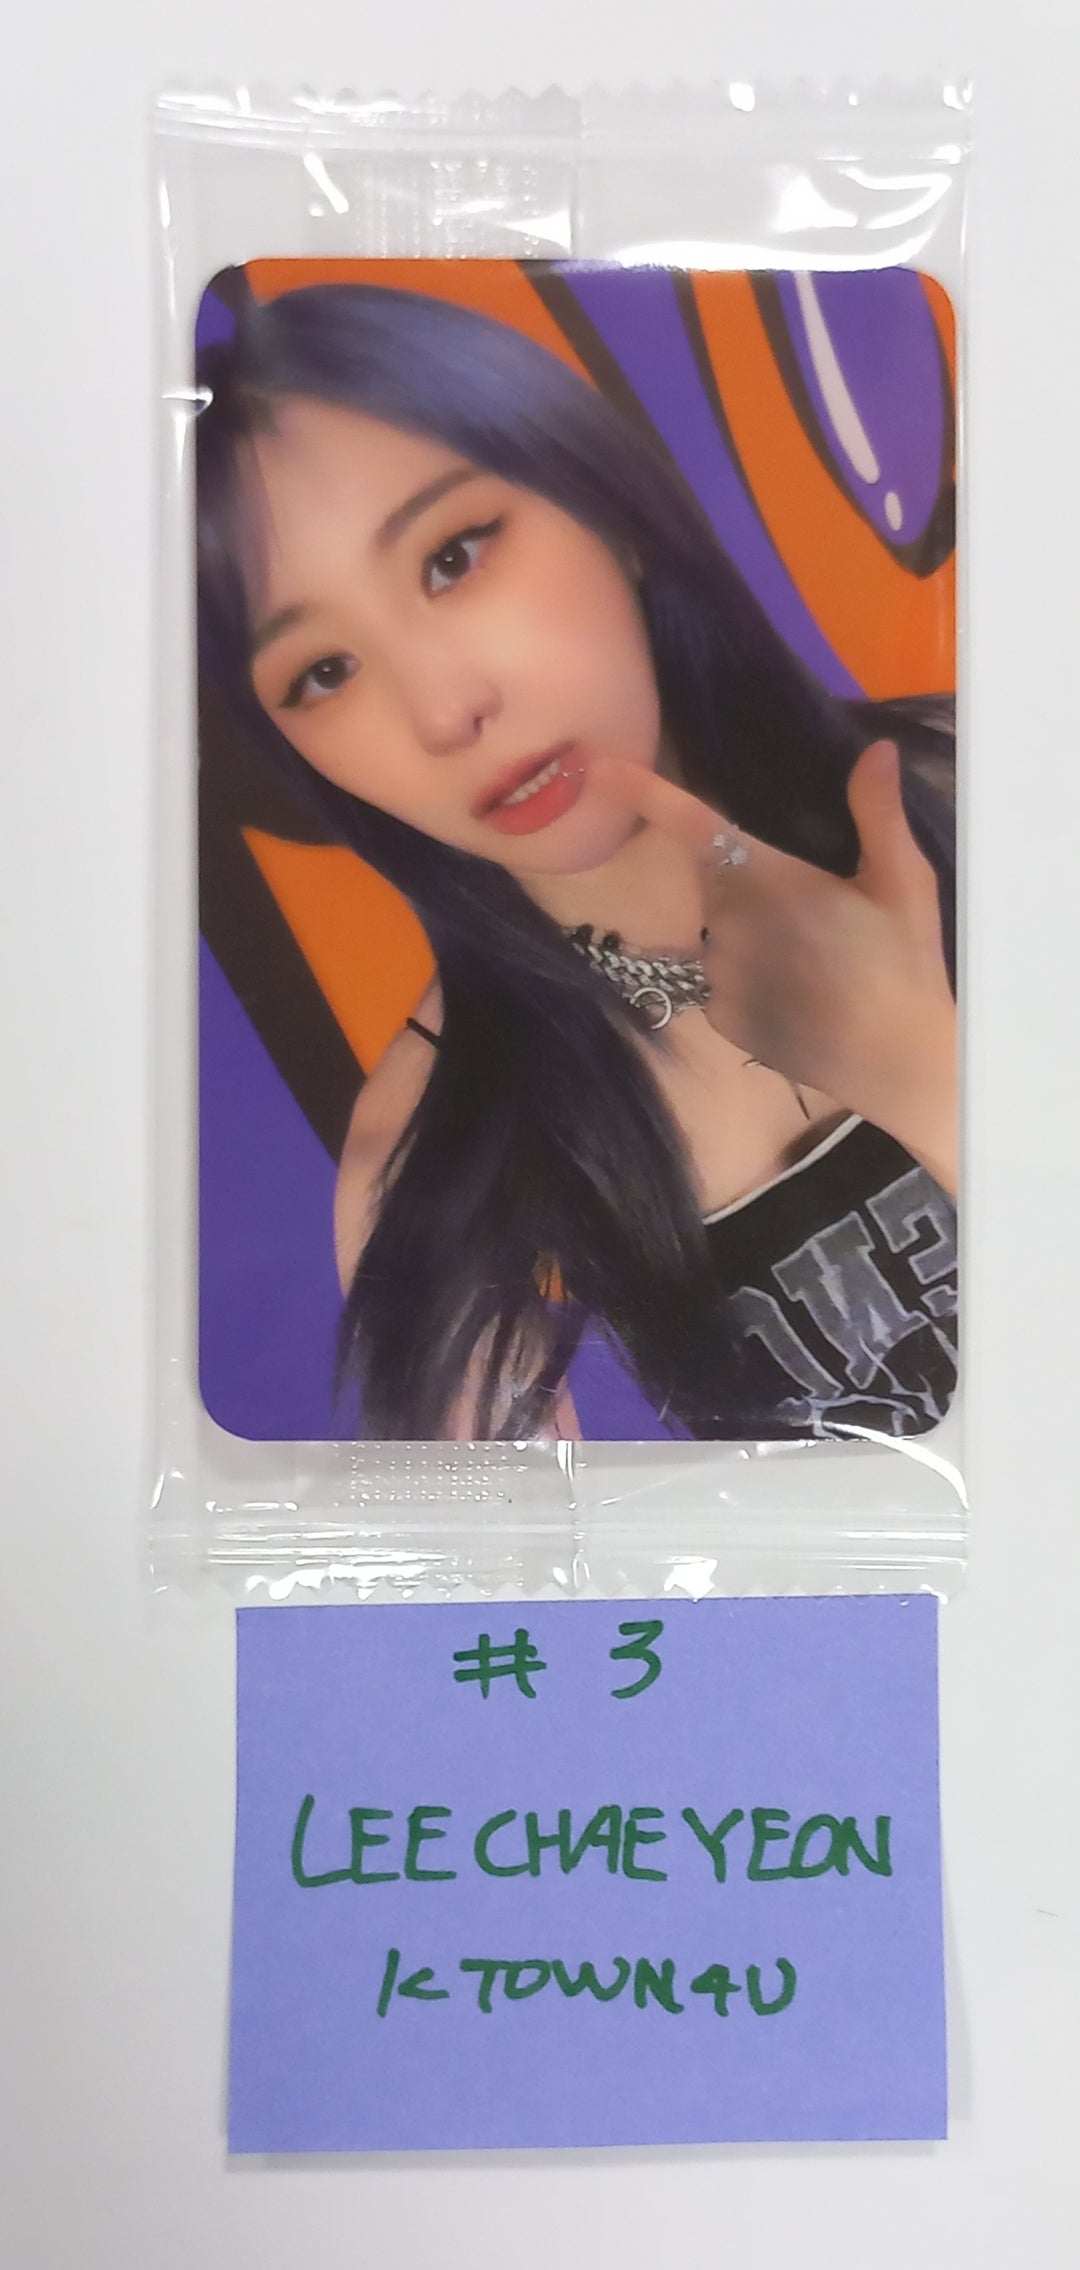 Lee Chae Yeon "The Move Street" - Ktown4U Fansign Event Photocard [Kit Ver] [23.09.12]